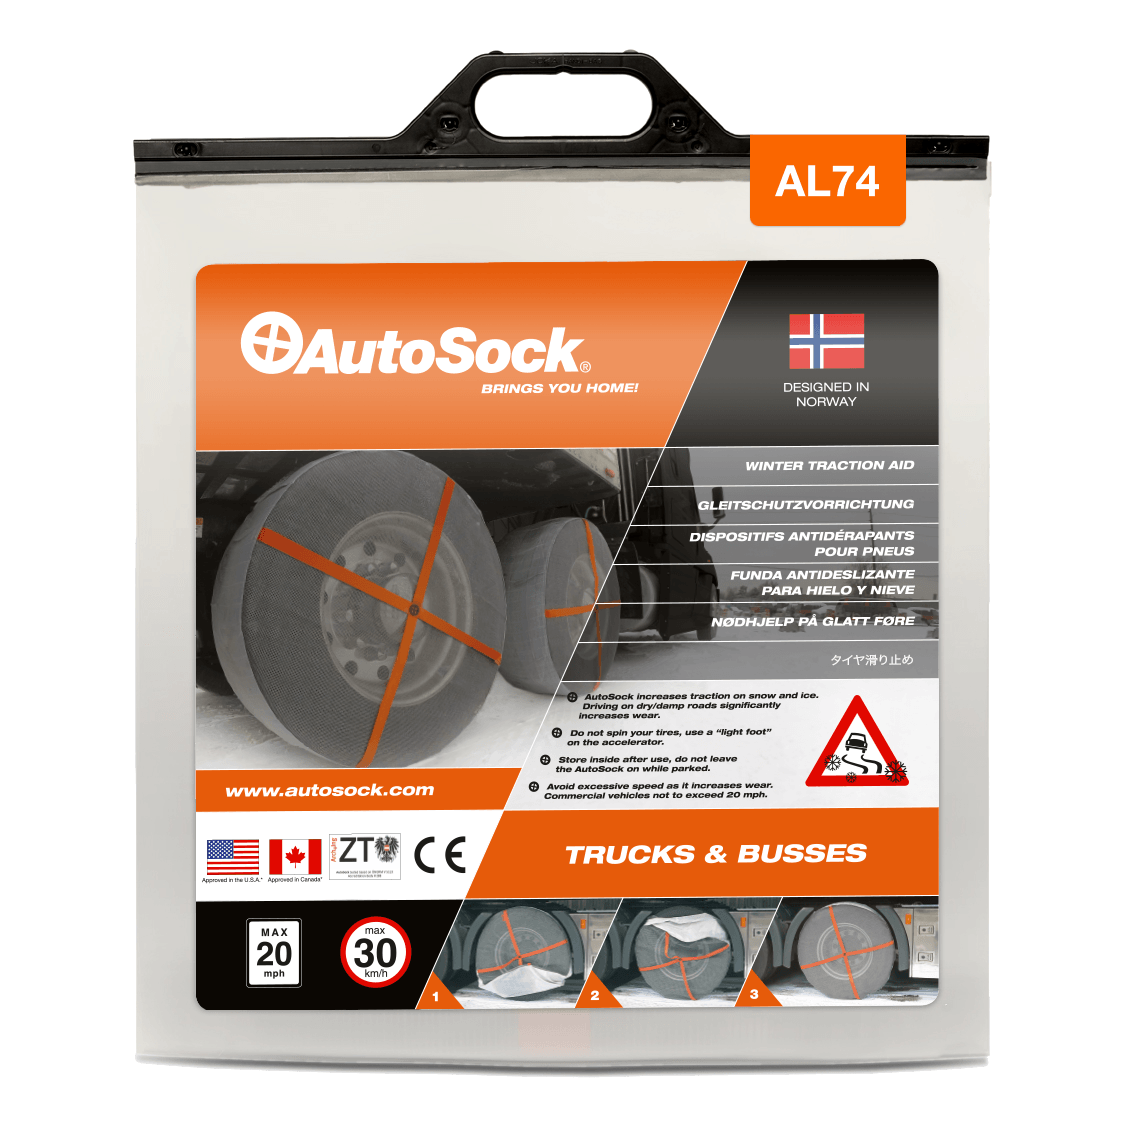 Product Packaging of AutoSock AL 74 AL74 for trucks (front view)